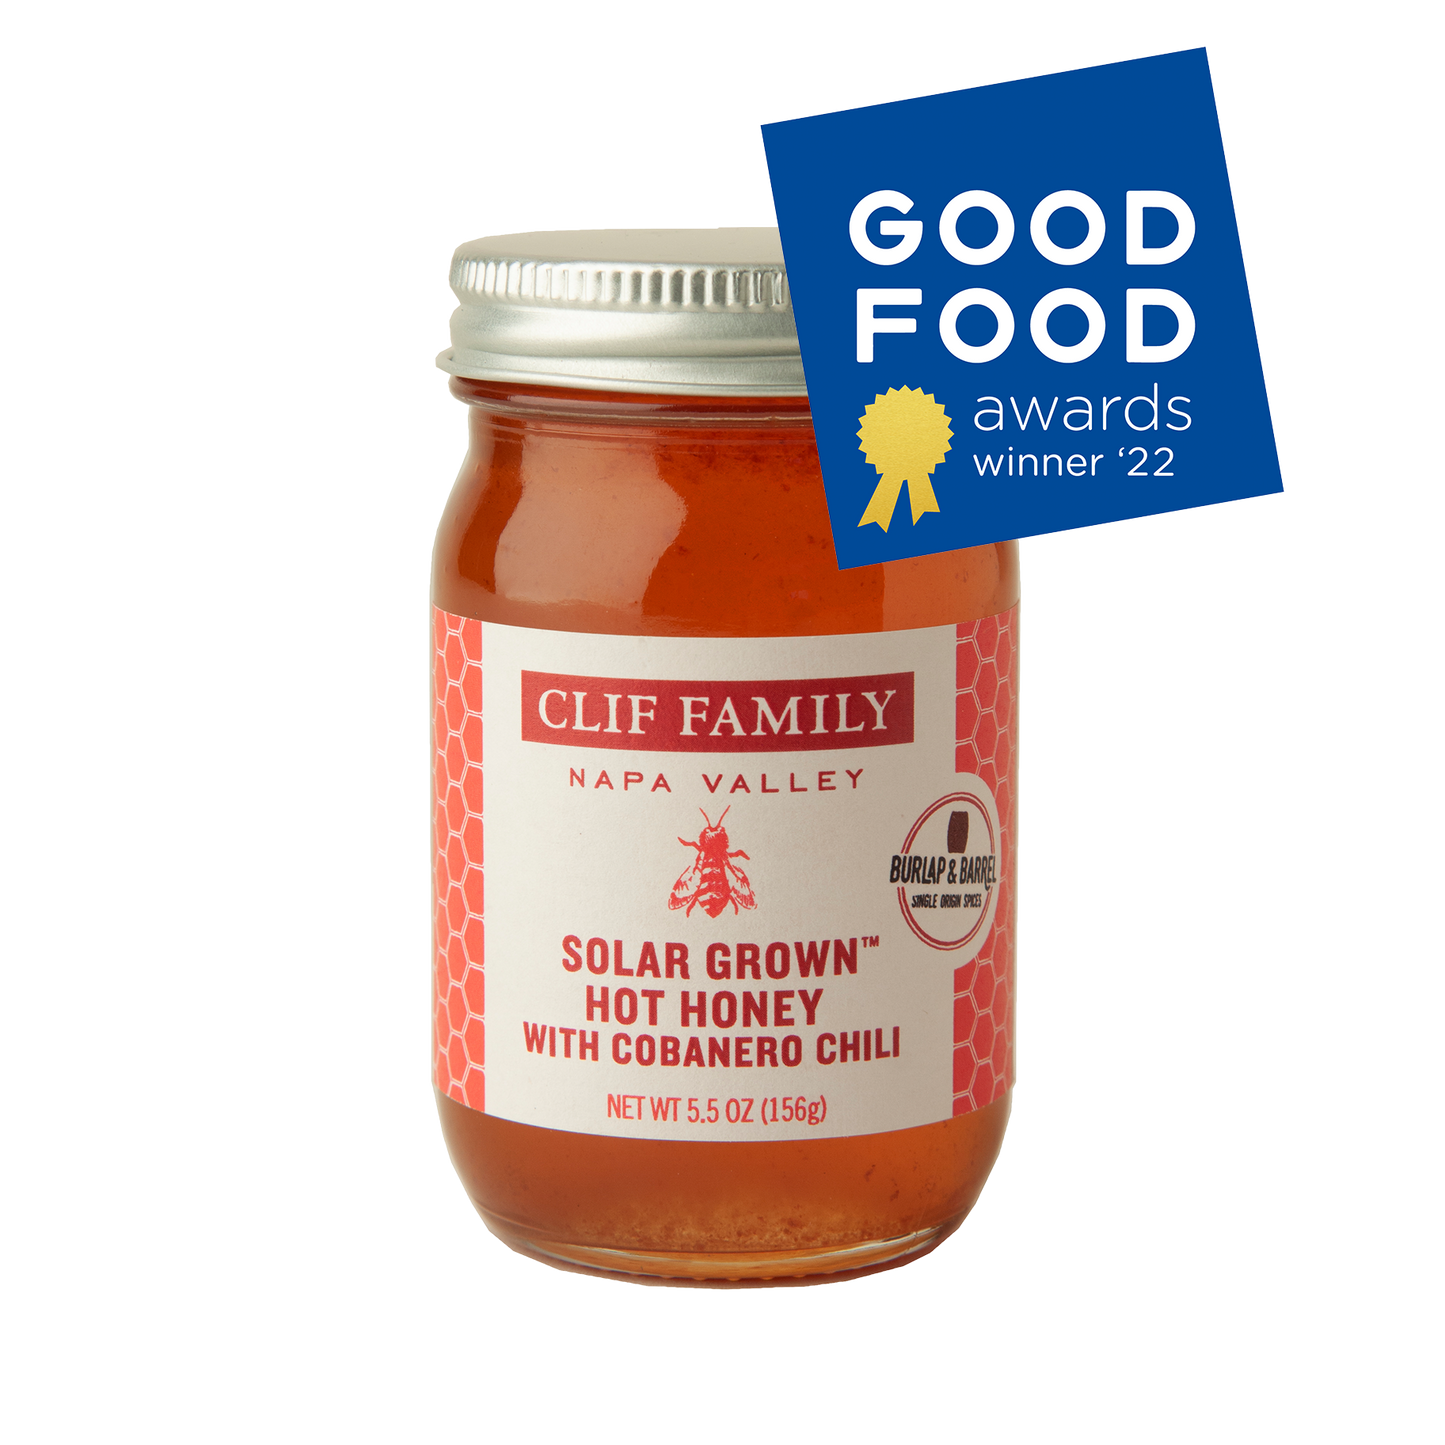 Solar Grown™ Hot Honey with Cobanero Chili  Clif Family Napa Valley, Certified B Corp Company   -better made easy-eco-friendly-sustainable-gifting